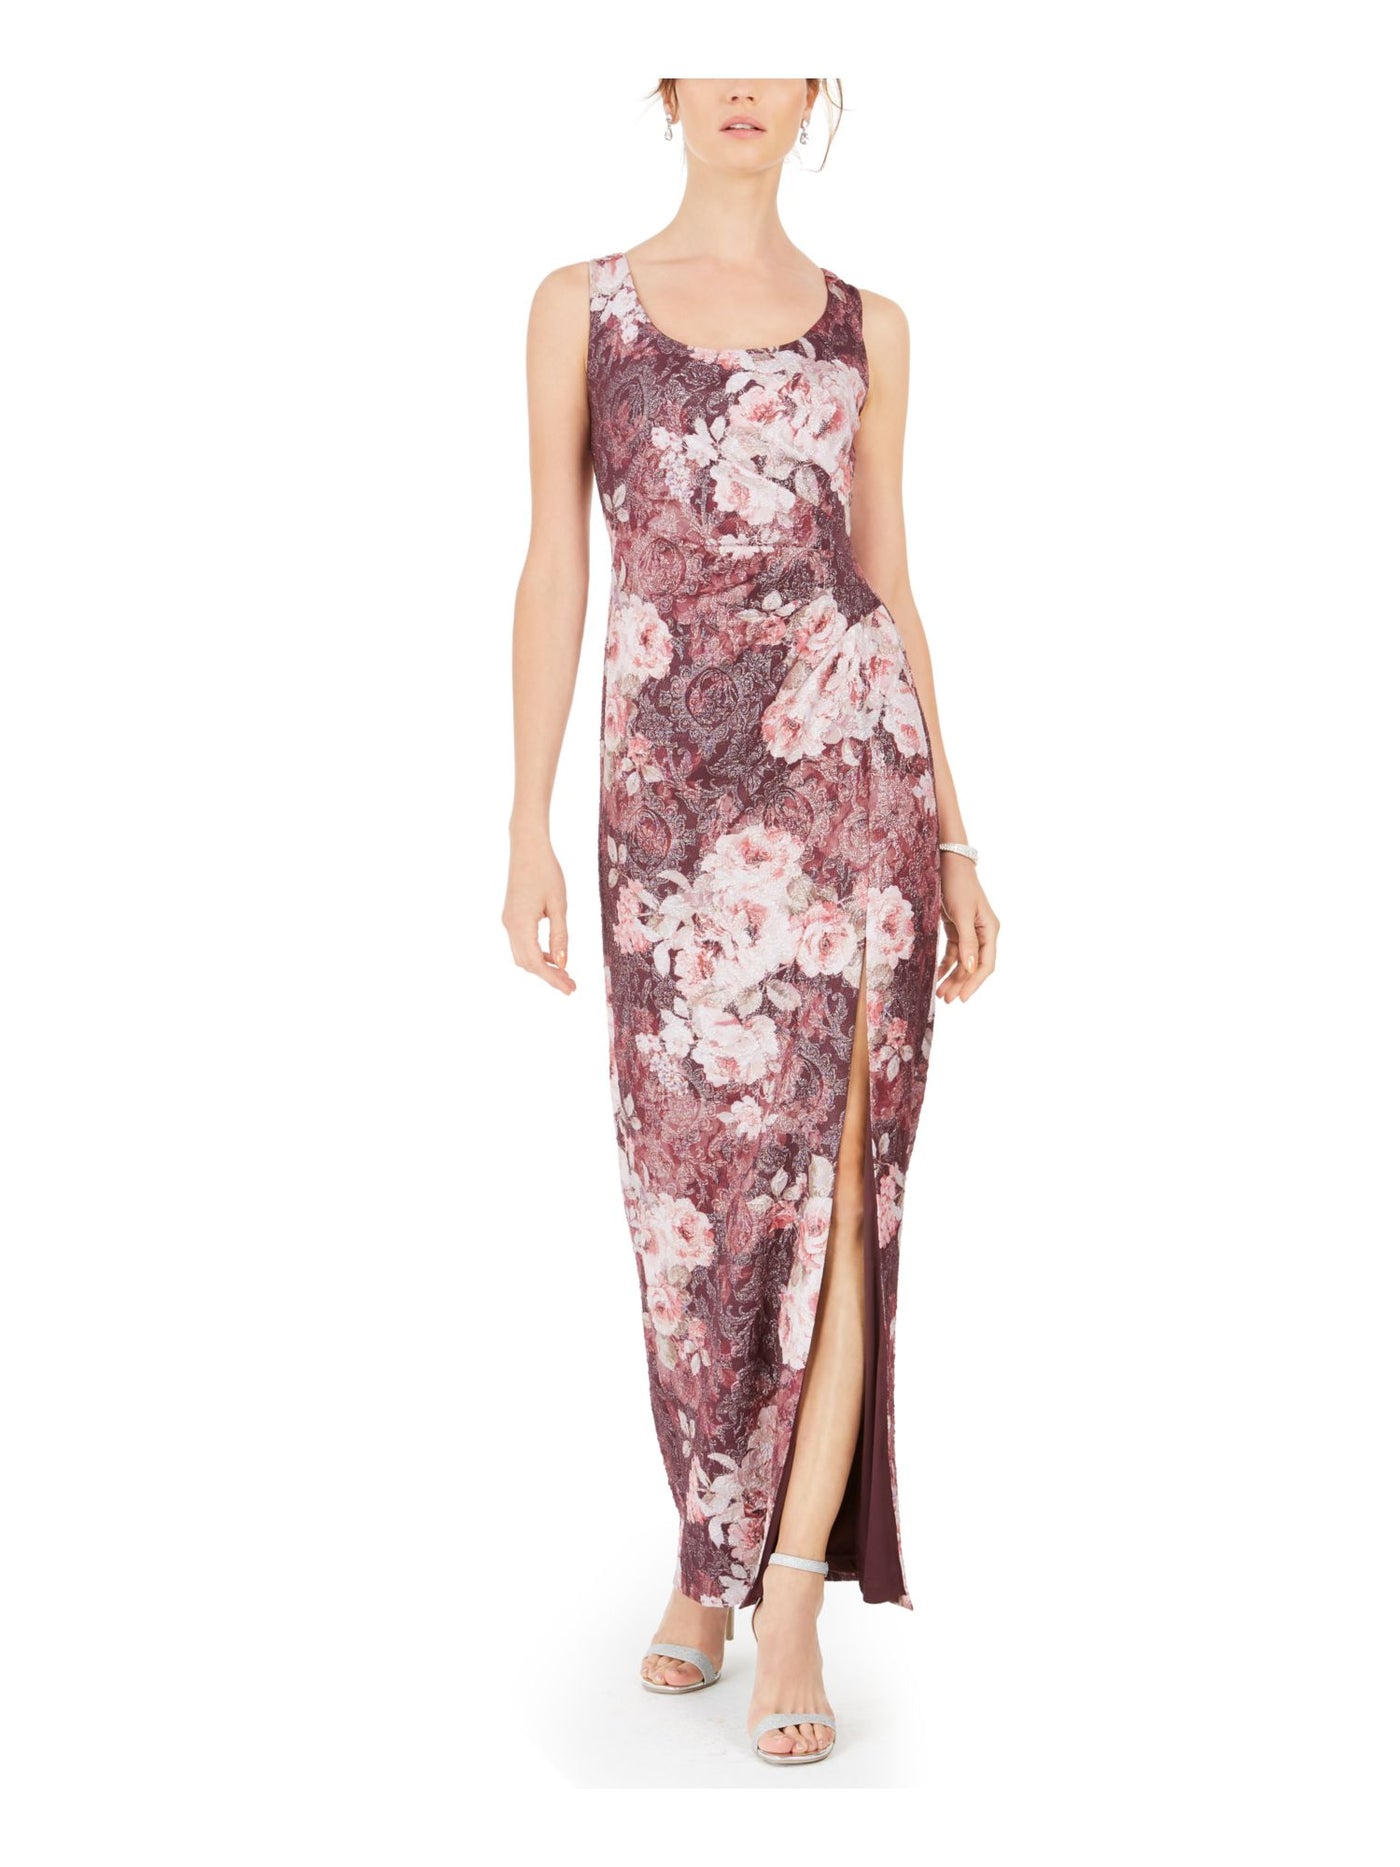 ADRIANNA PAPELL Womens Burgundy Slitted Ruched Floral Sleeveless Scoop Neck Maxi Evening Dress 14